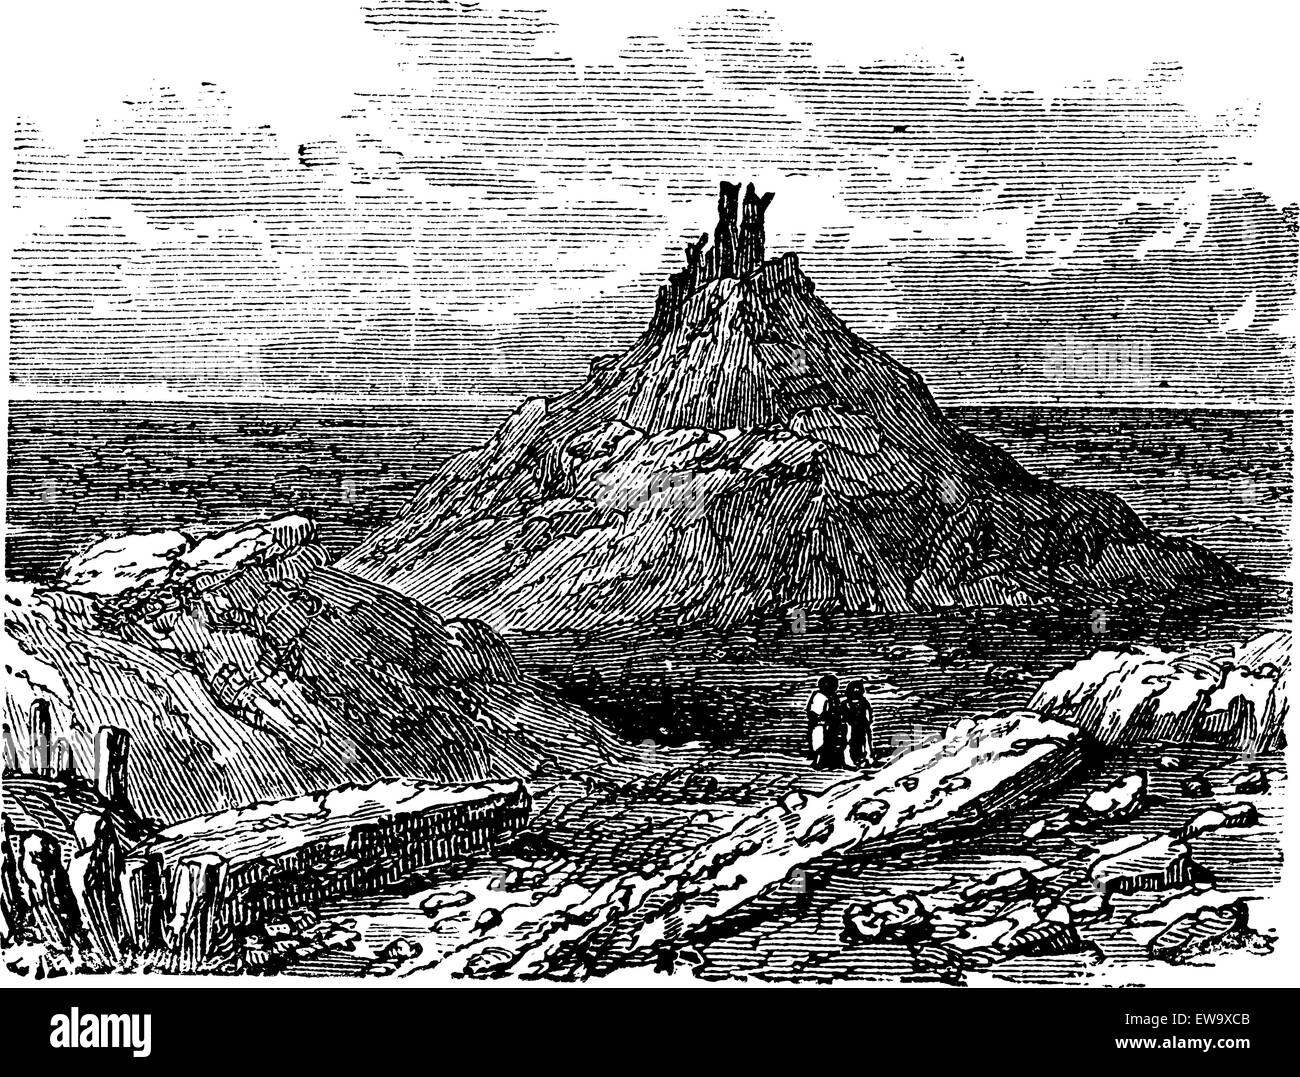 Borsippa or Birs Nimrud, in Babil, Iraq, during the 1890s, vintage engraving. Old engraved illustration of Borsippa. Stock Vector